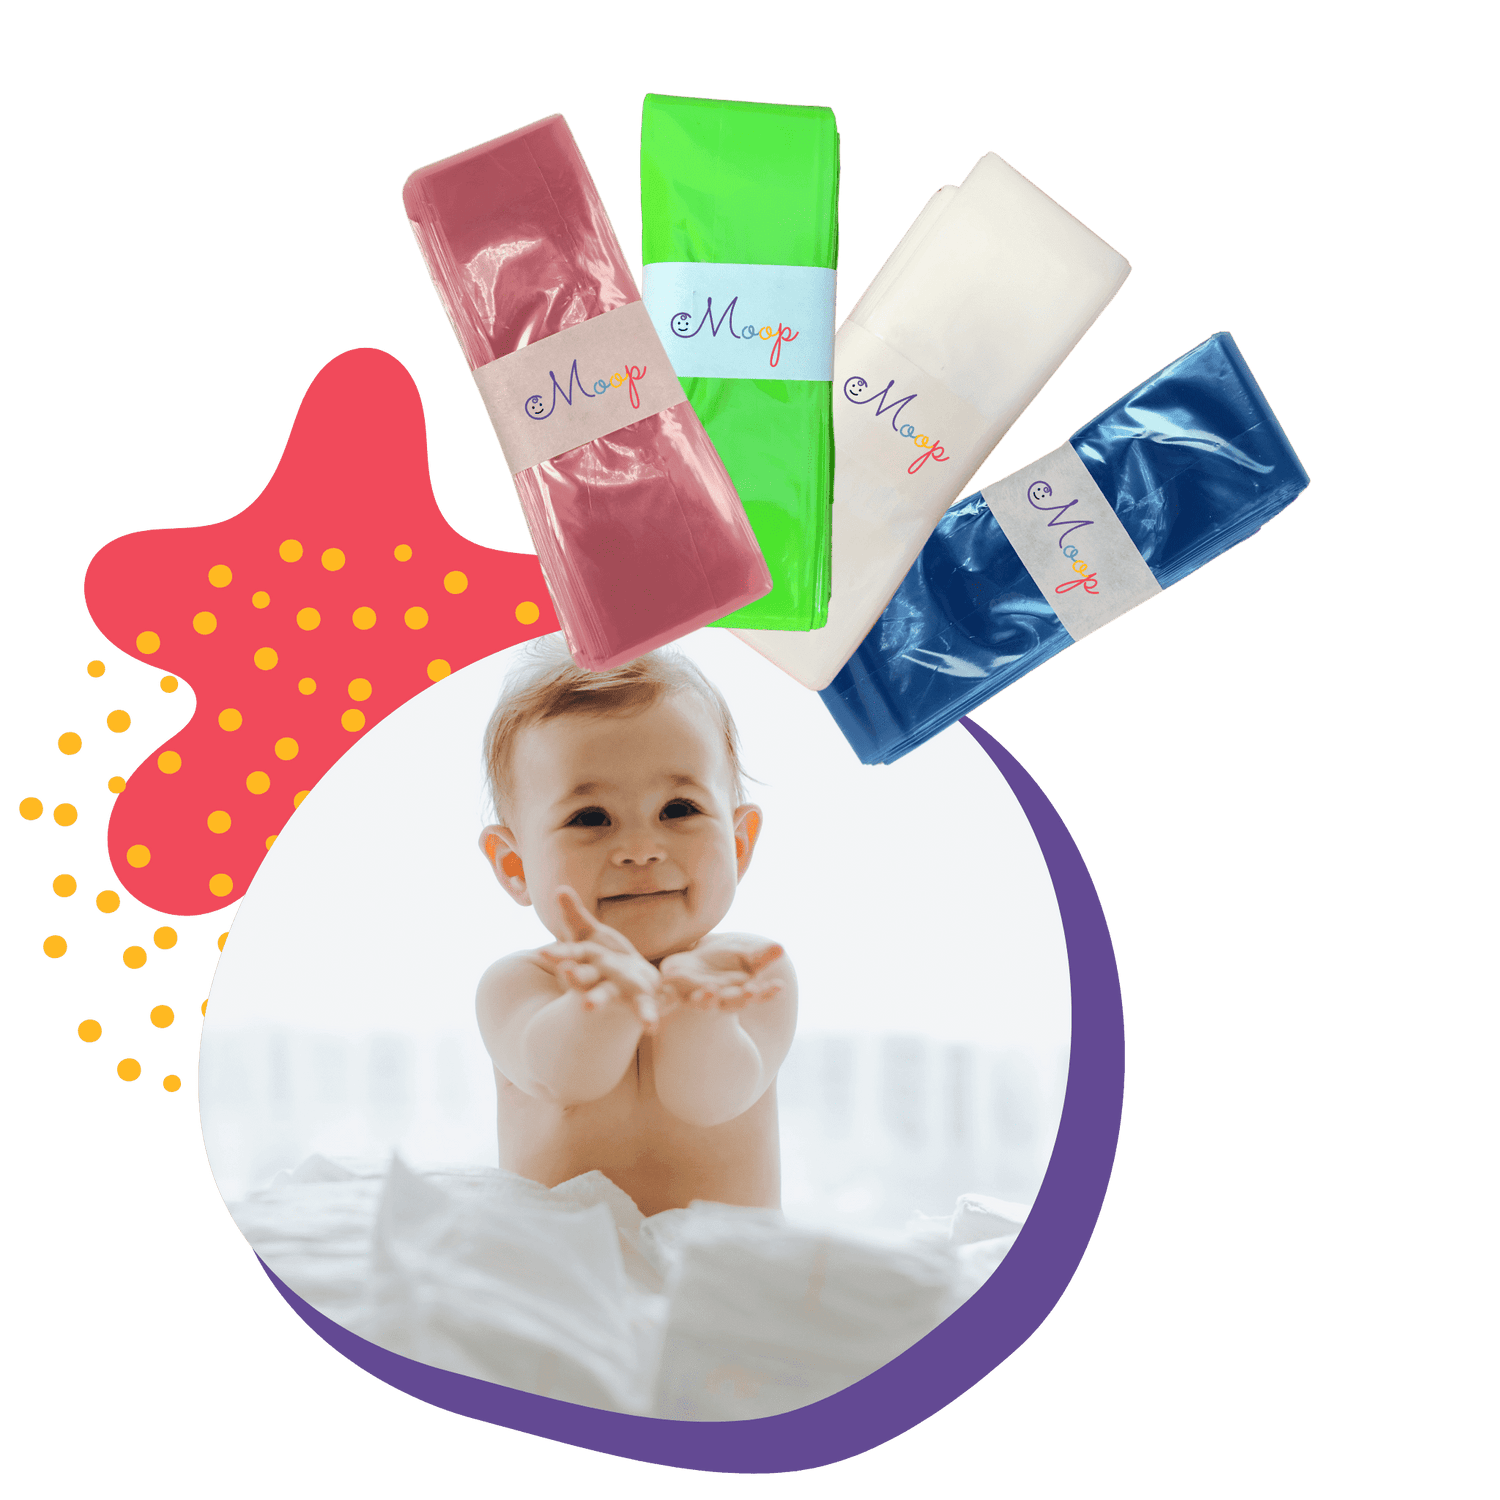 Baby holding Moop refill bags, that are available in pink, white, blue and green colors